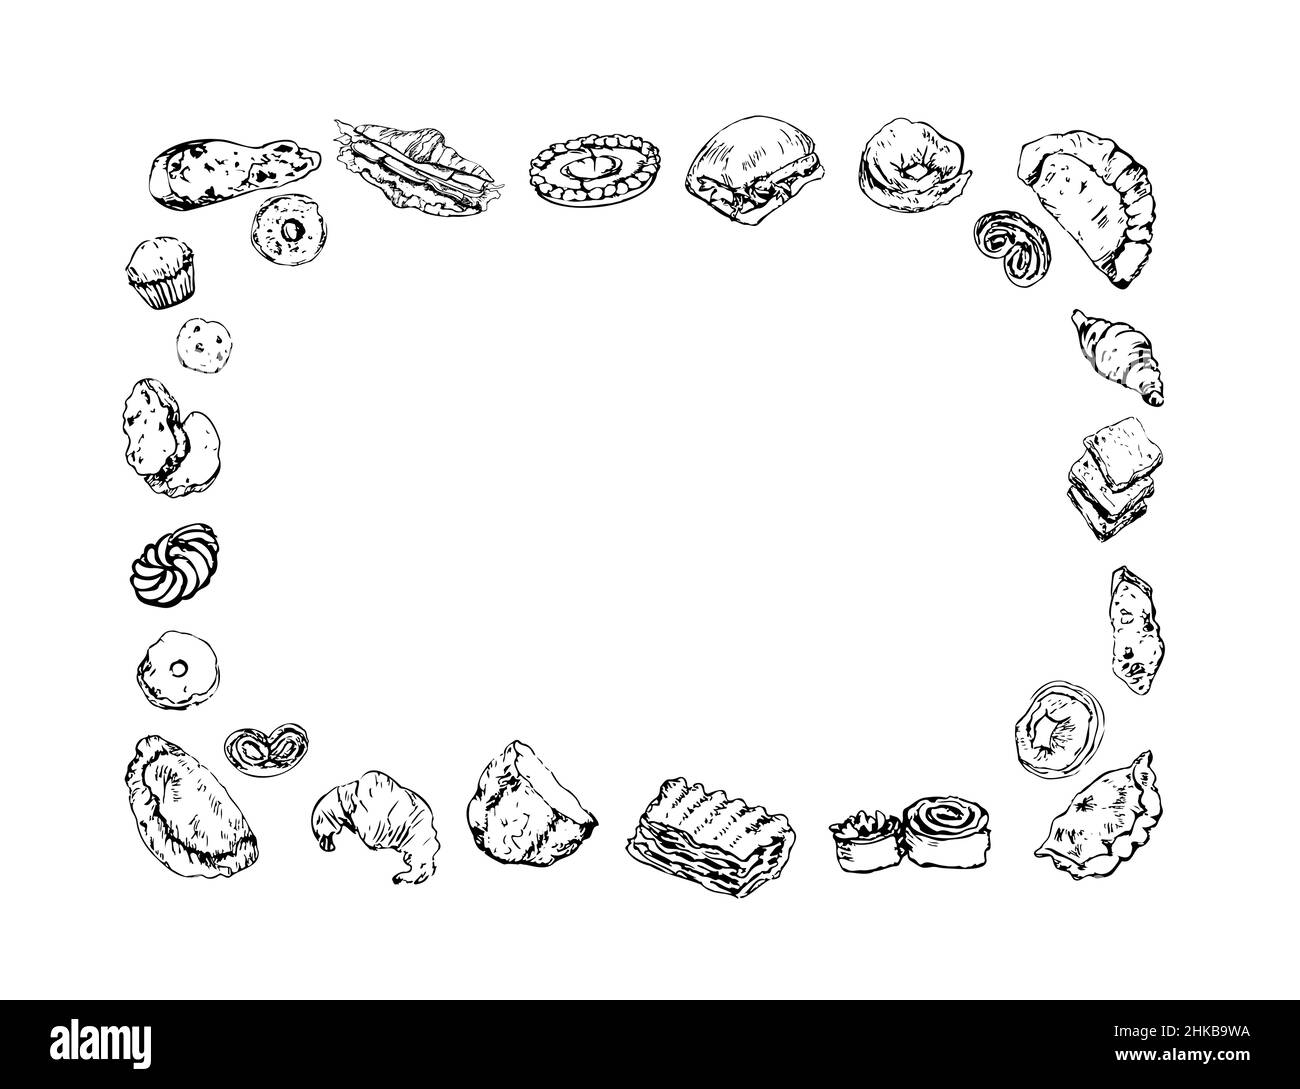 Bread and bakery goods hand drawn frame. Vintage patisserie stylized vector sketches. Copy space. Line art design elements for prints Stock Vector